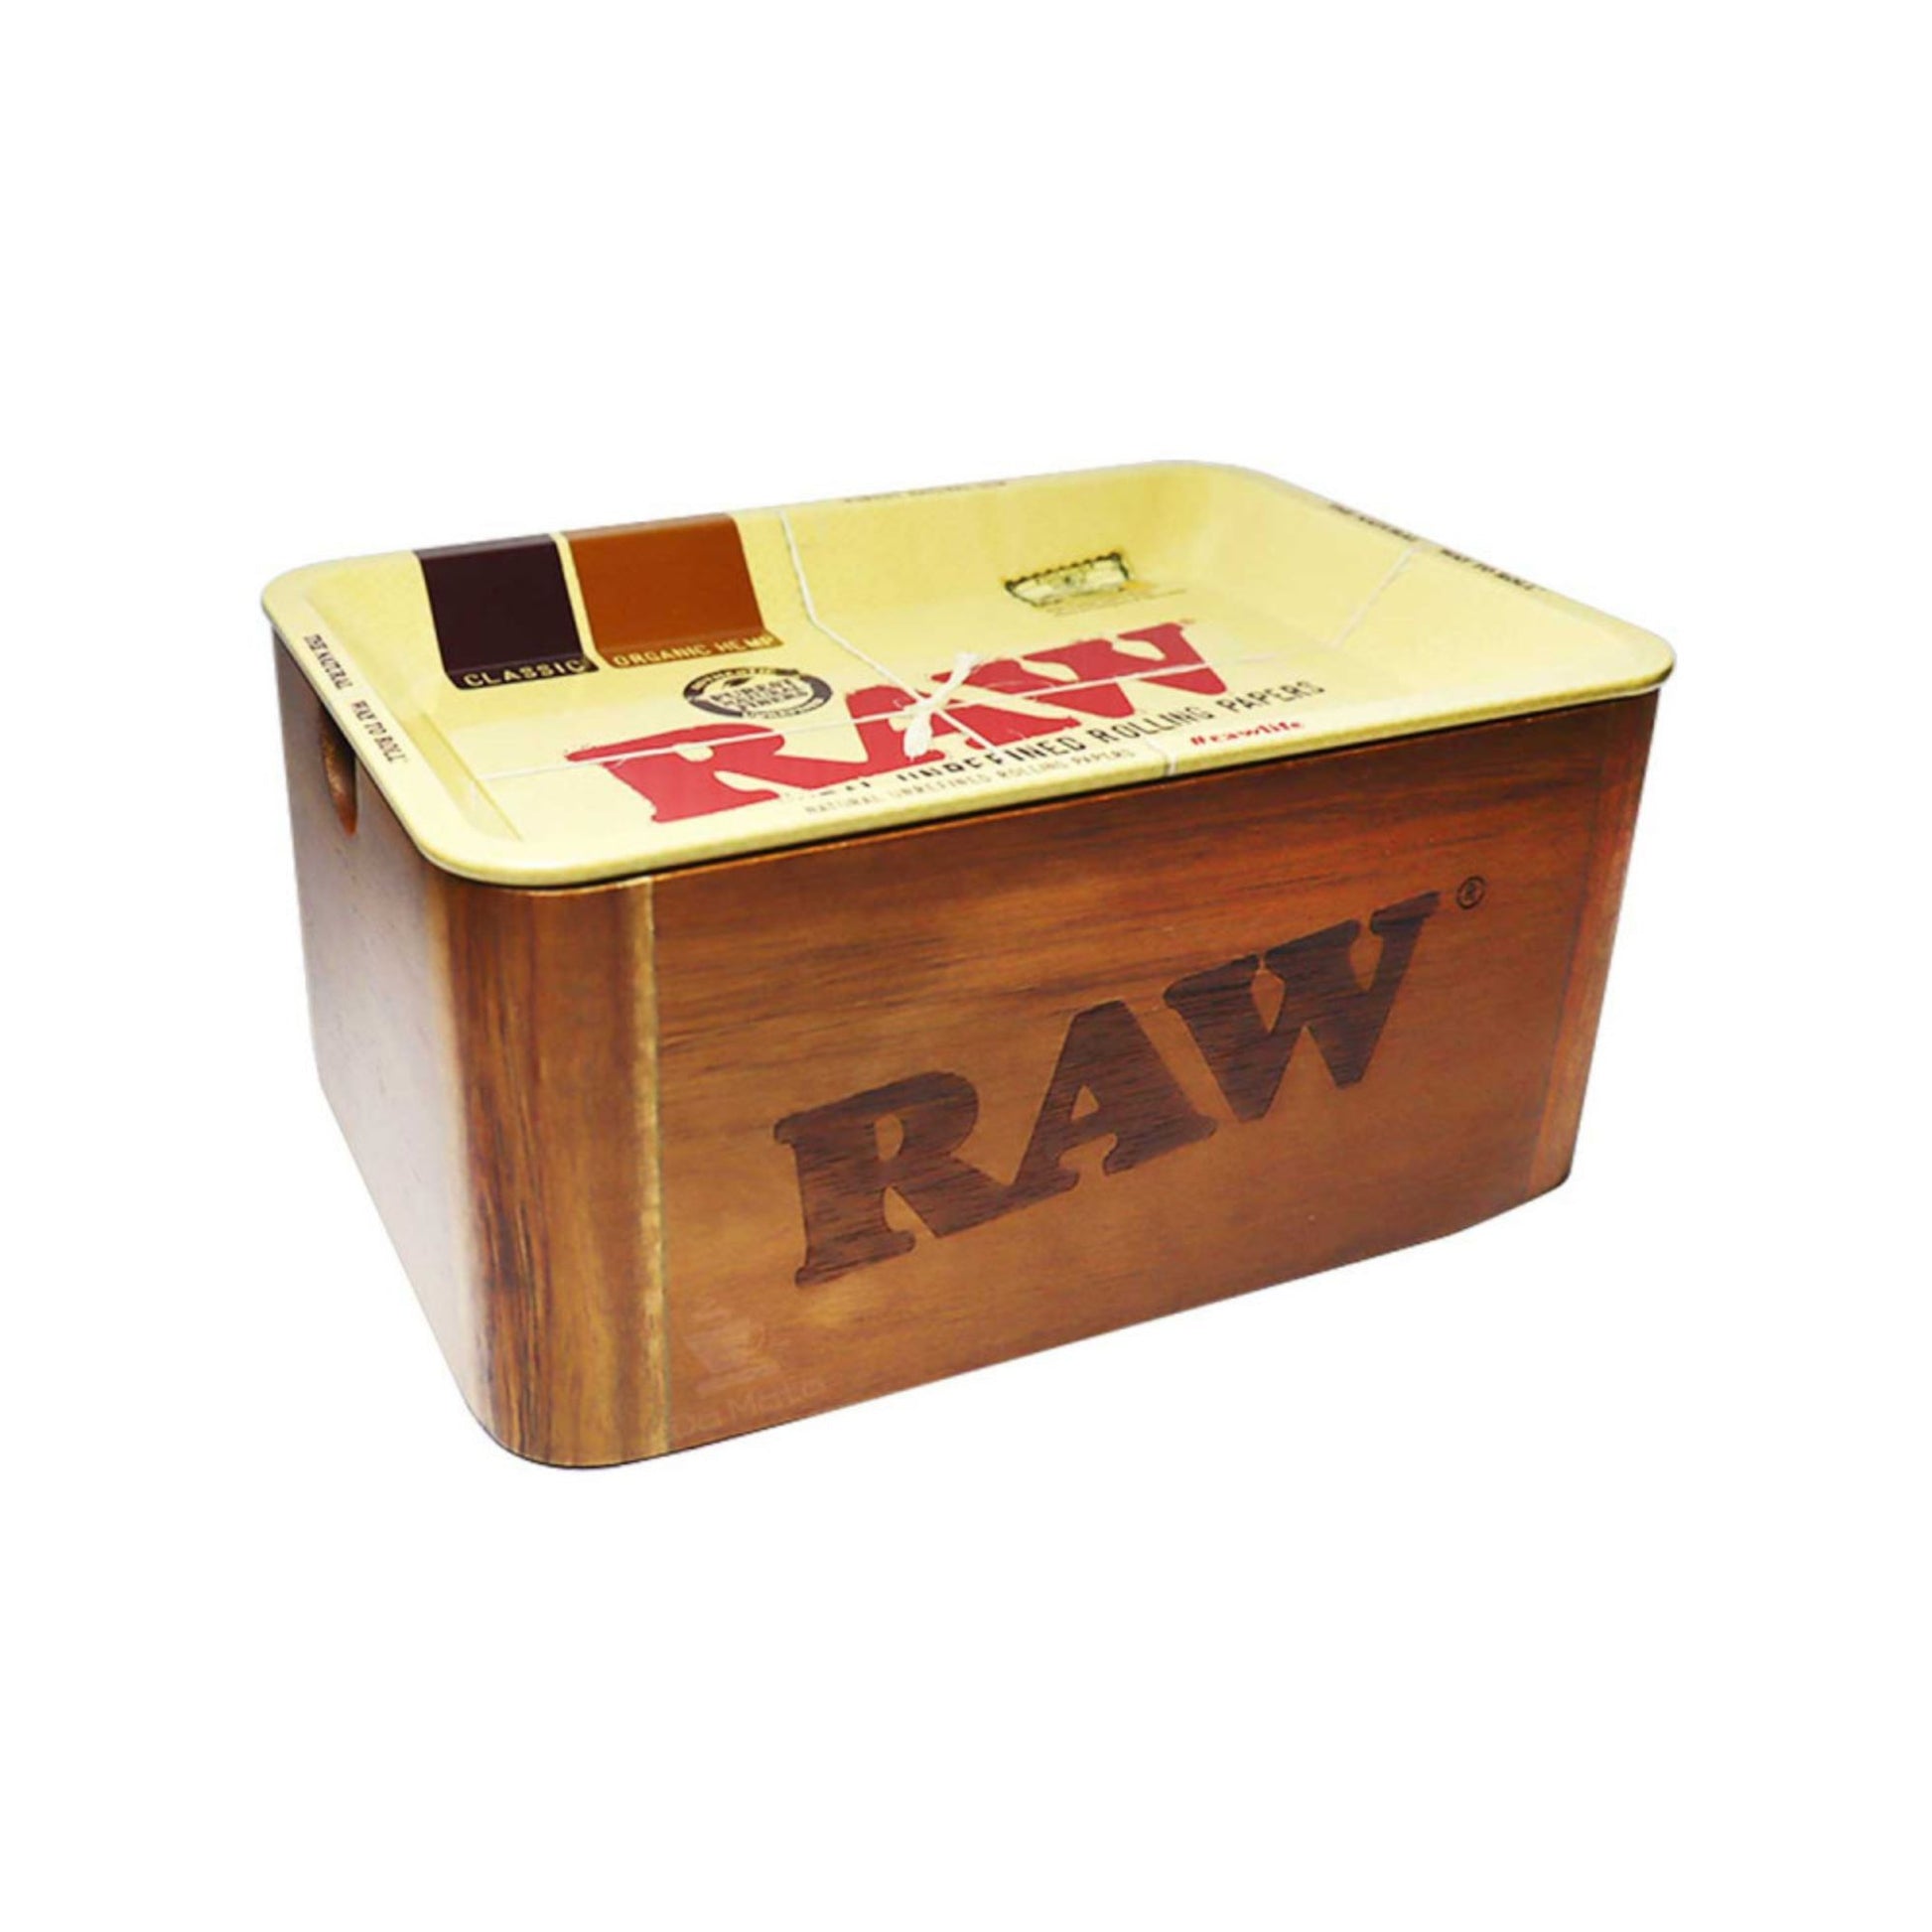 Buy RAW Cache Box Mini online in India at HighJack